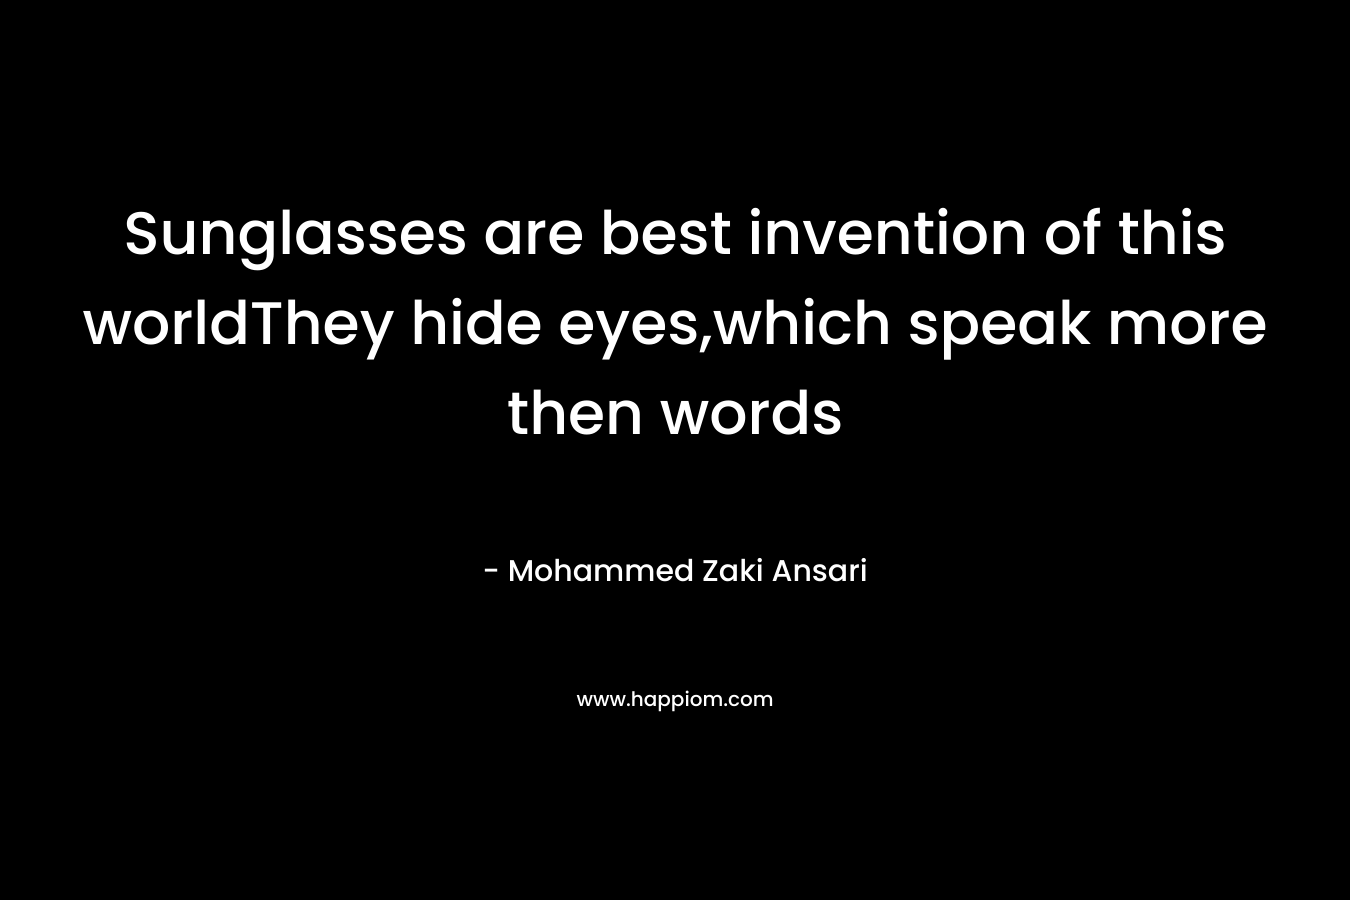 Sunglasses are best invention of this worldThey hide eyes,which speak more then words – Mohammed Zaki Ansari